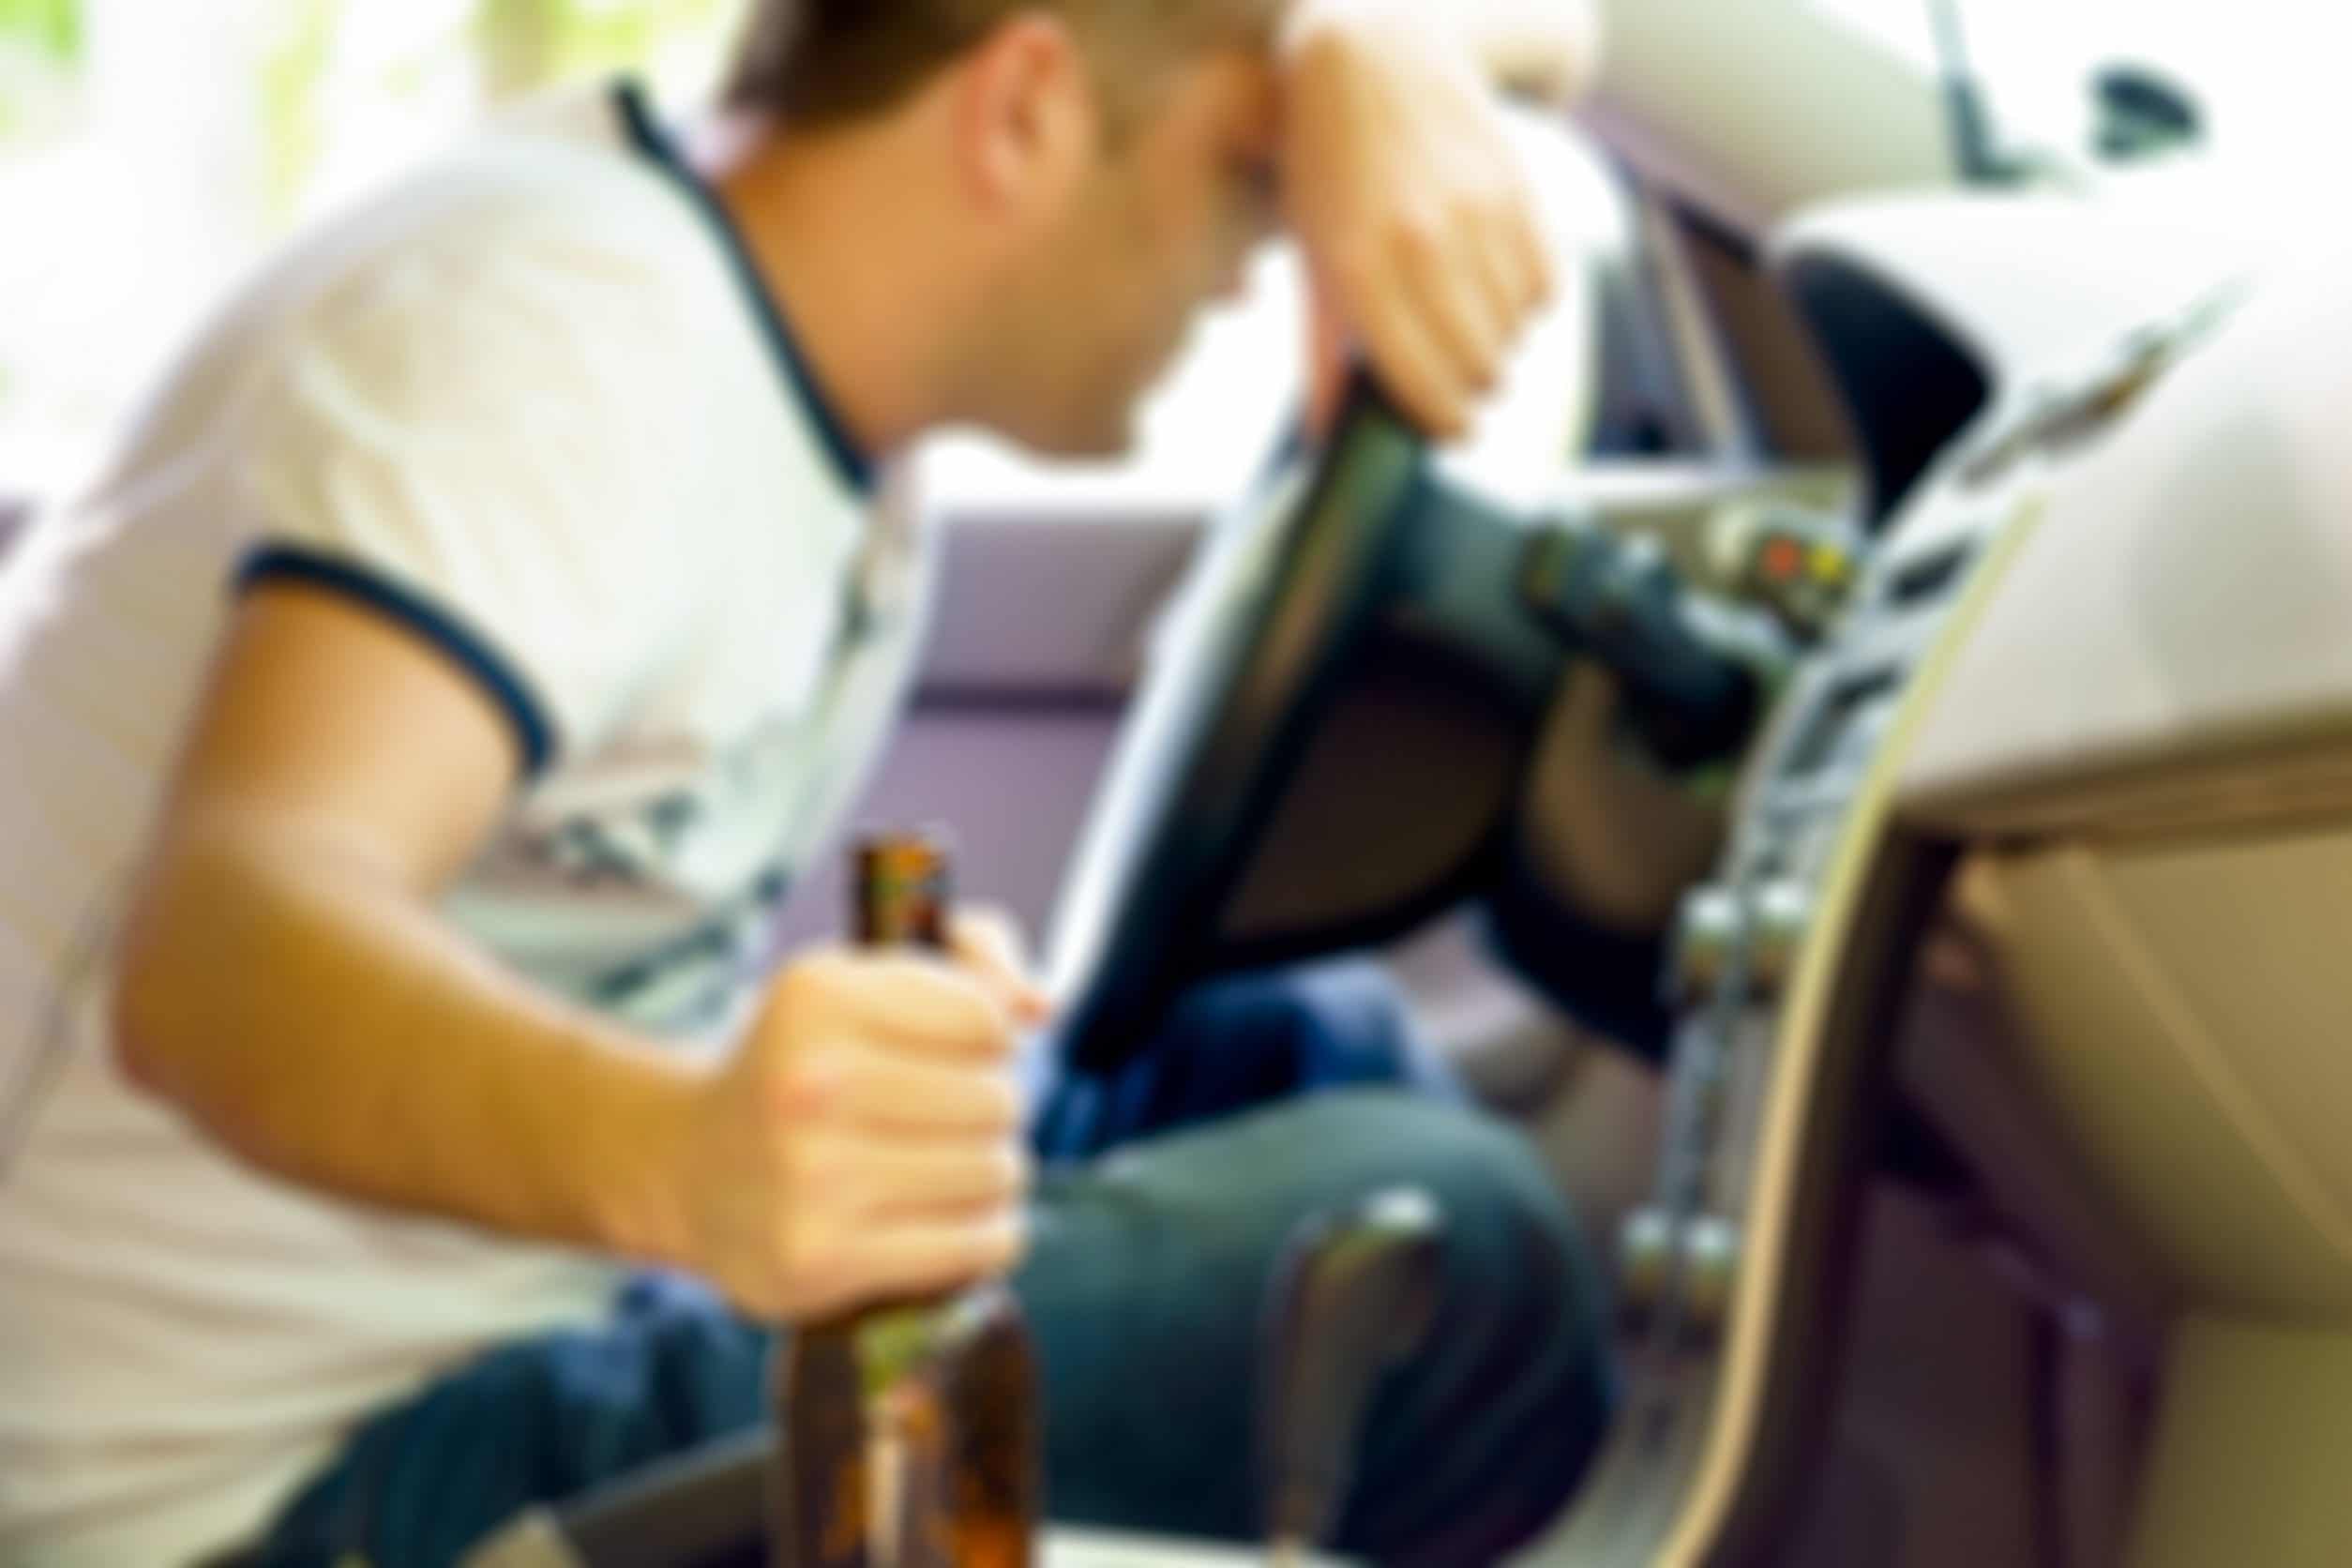 Does Sleeping in Your Car Count as a DWI in MN?